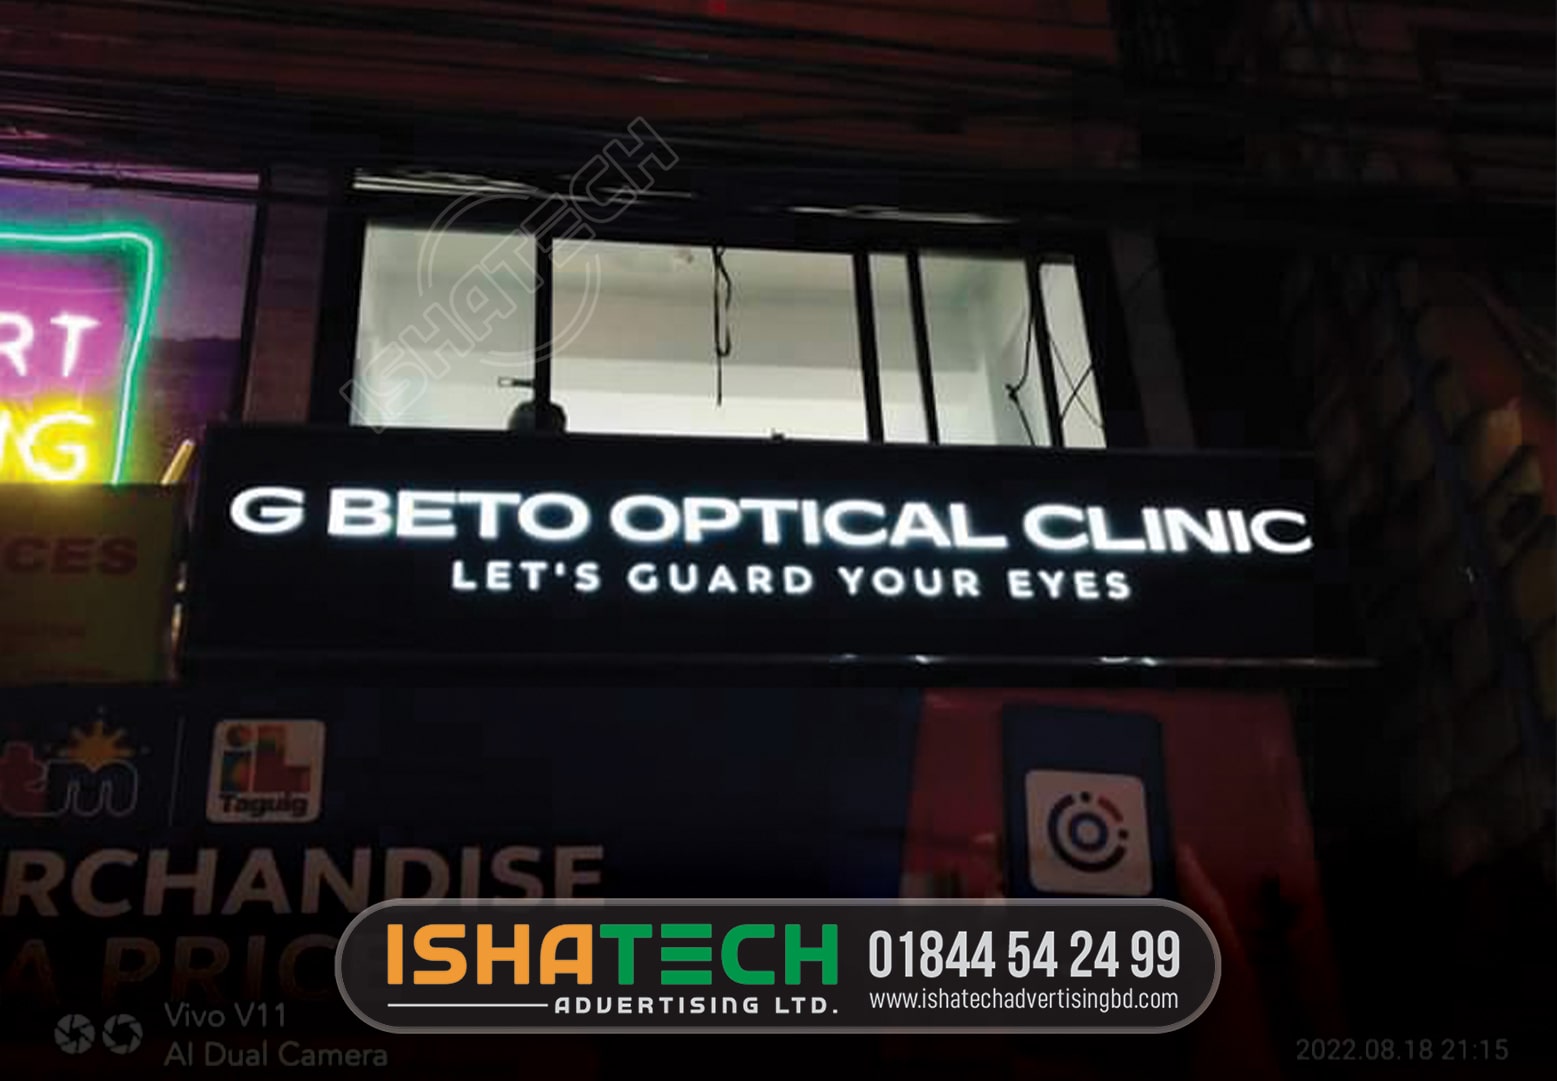 G BETO OPTICAL CLINIC ;ETS GUARD YOUR EYES OFFICE ACRYLIC LIGHTING LETTER SIGNAGE MAKER IN DHAKA BD